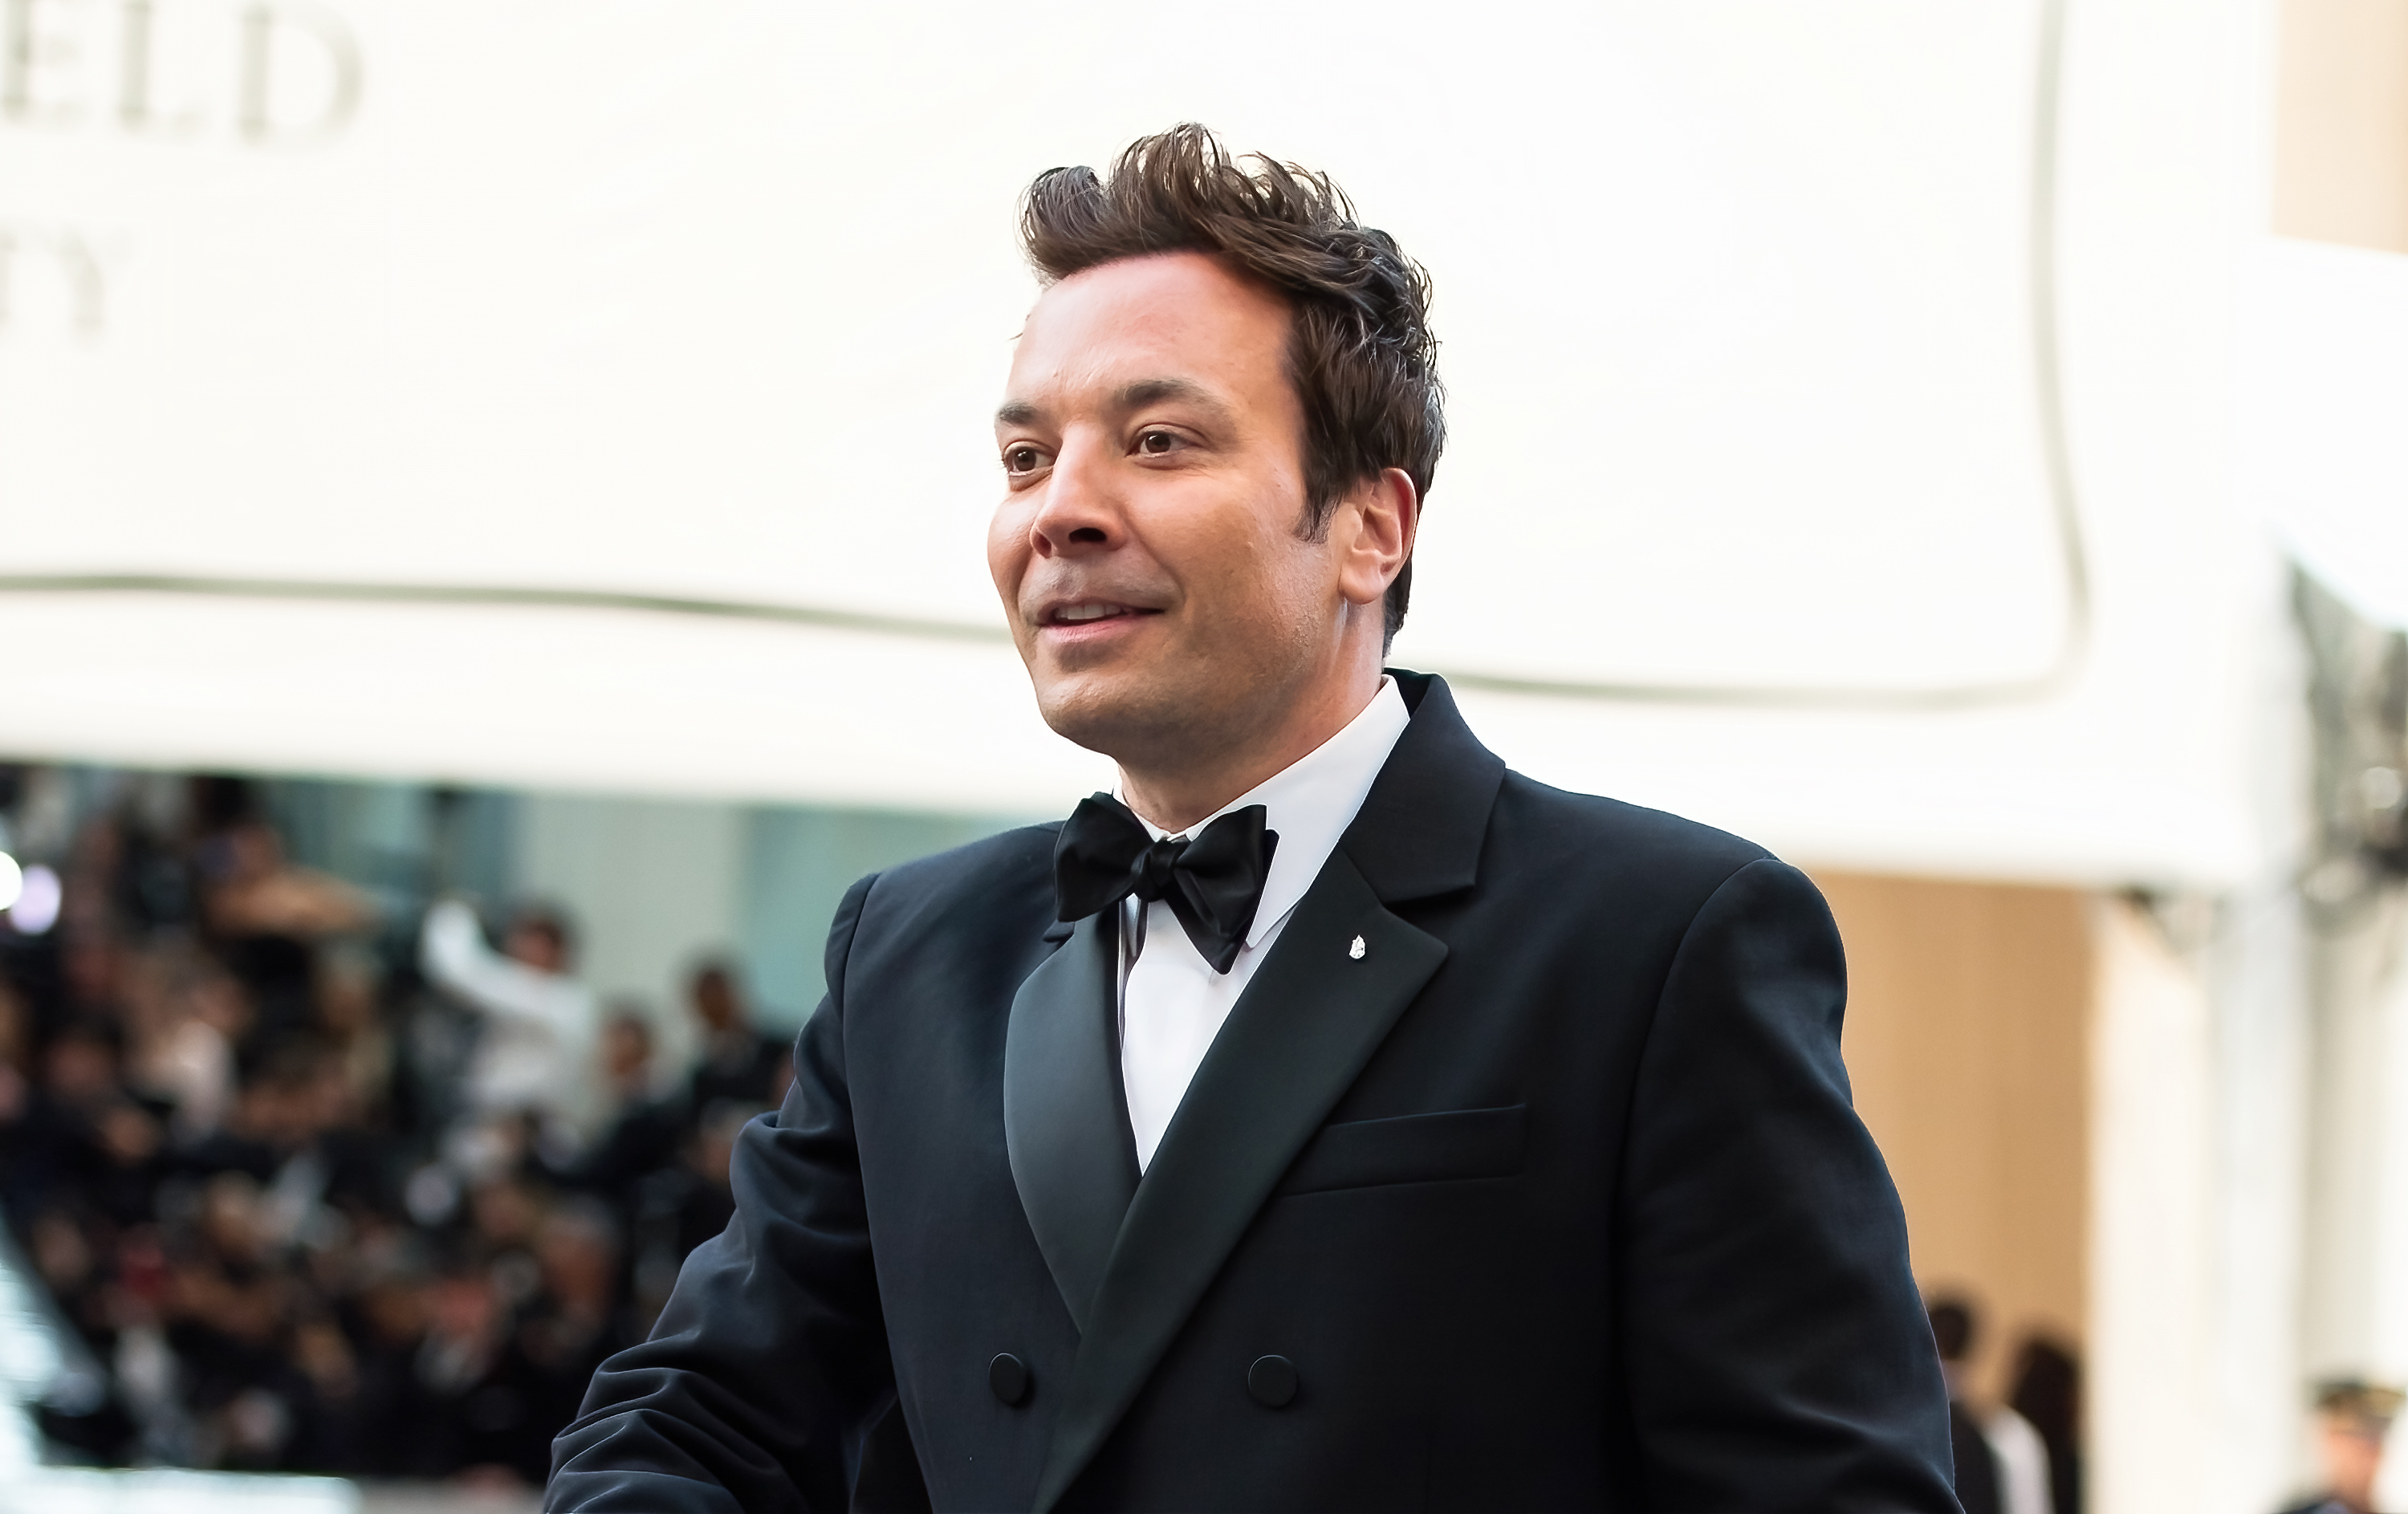 A close-up of Jimmy Fallon in a tuxedo